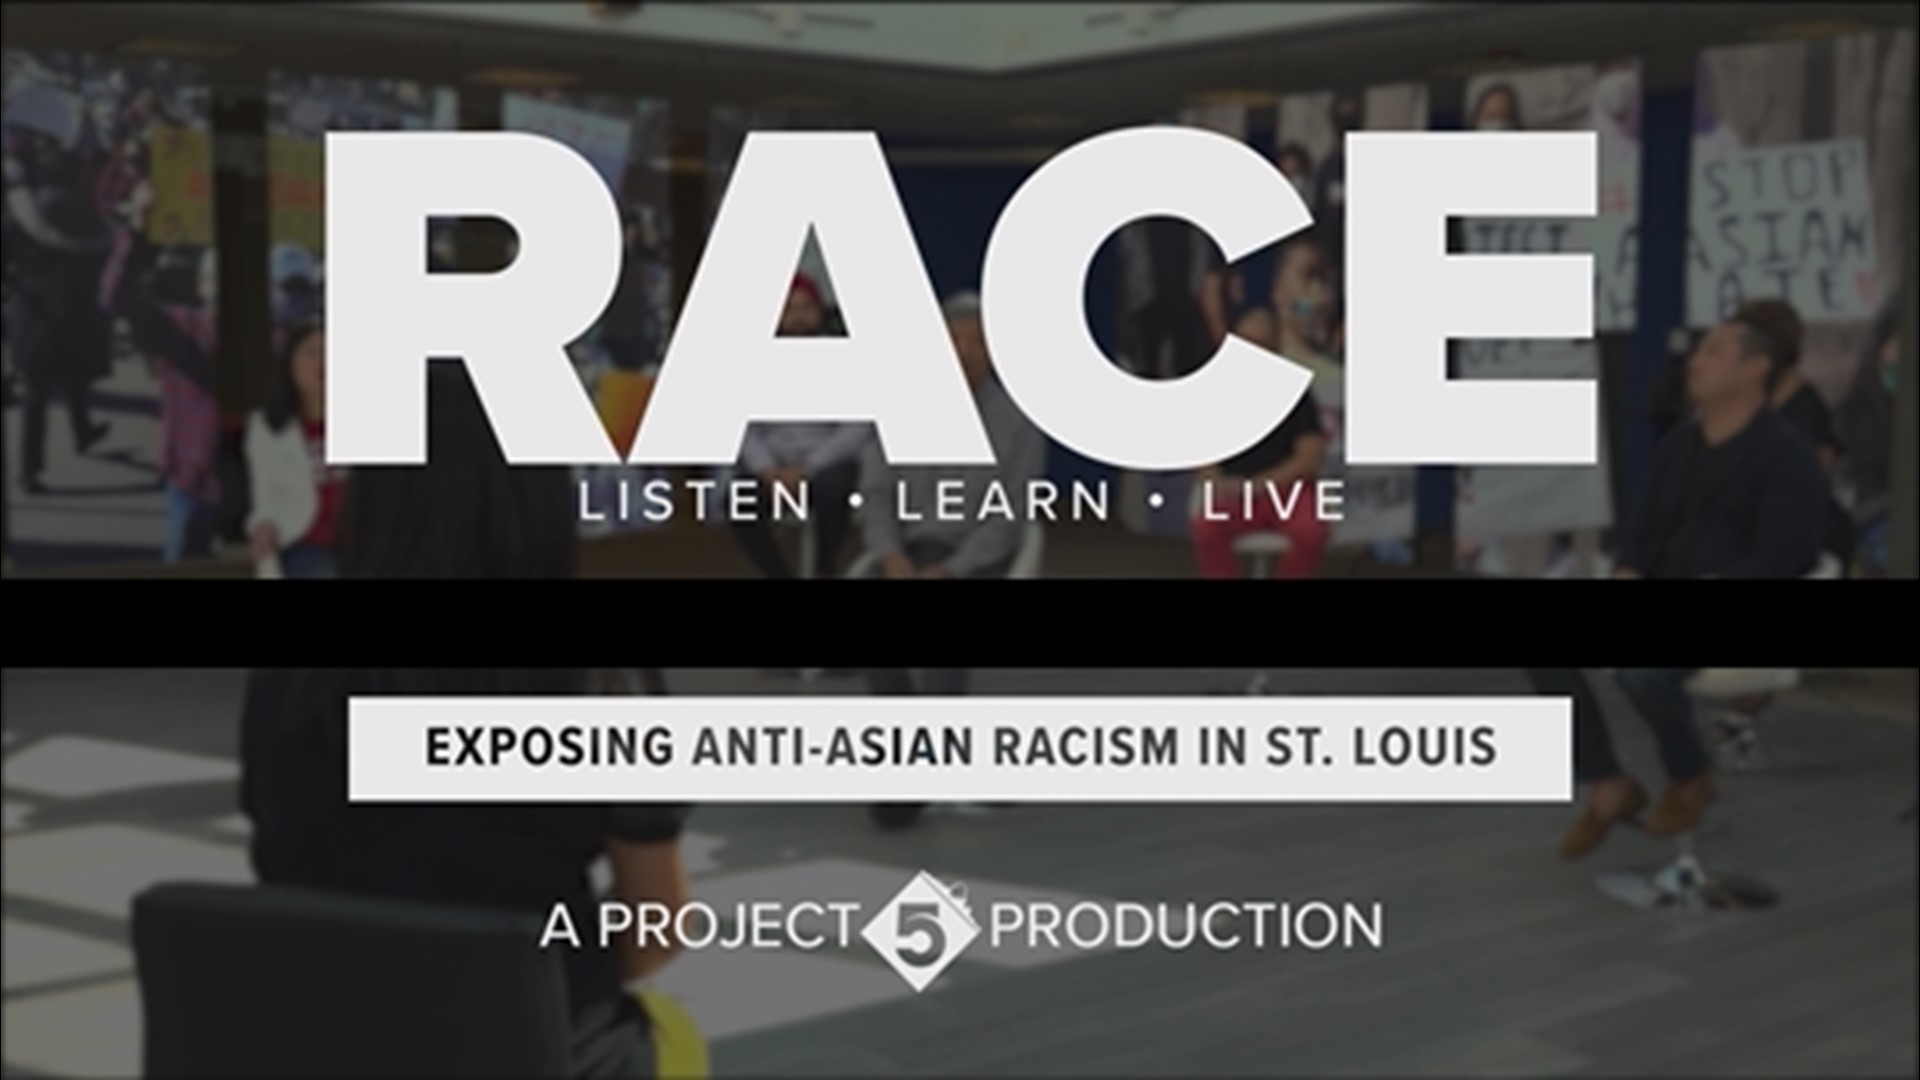 Since the beginning of the pandemic, violence against members of the AAPI community has soared. Learn the impact of these attacks and hate in St. Louis.